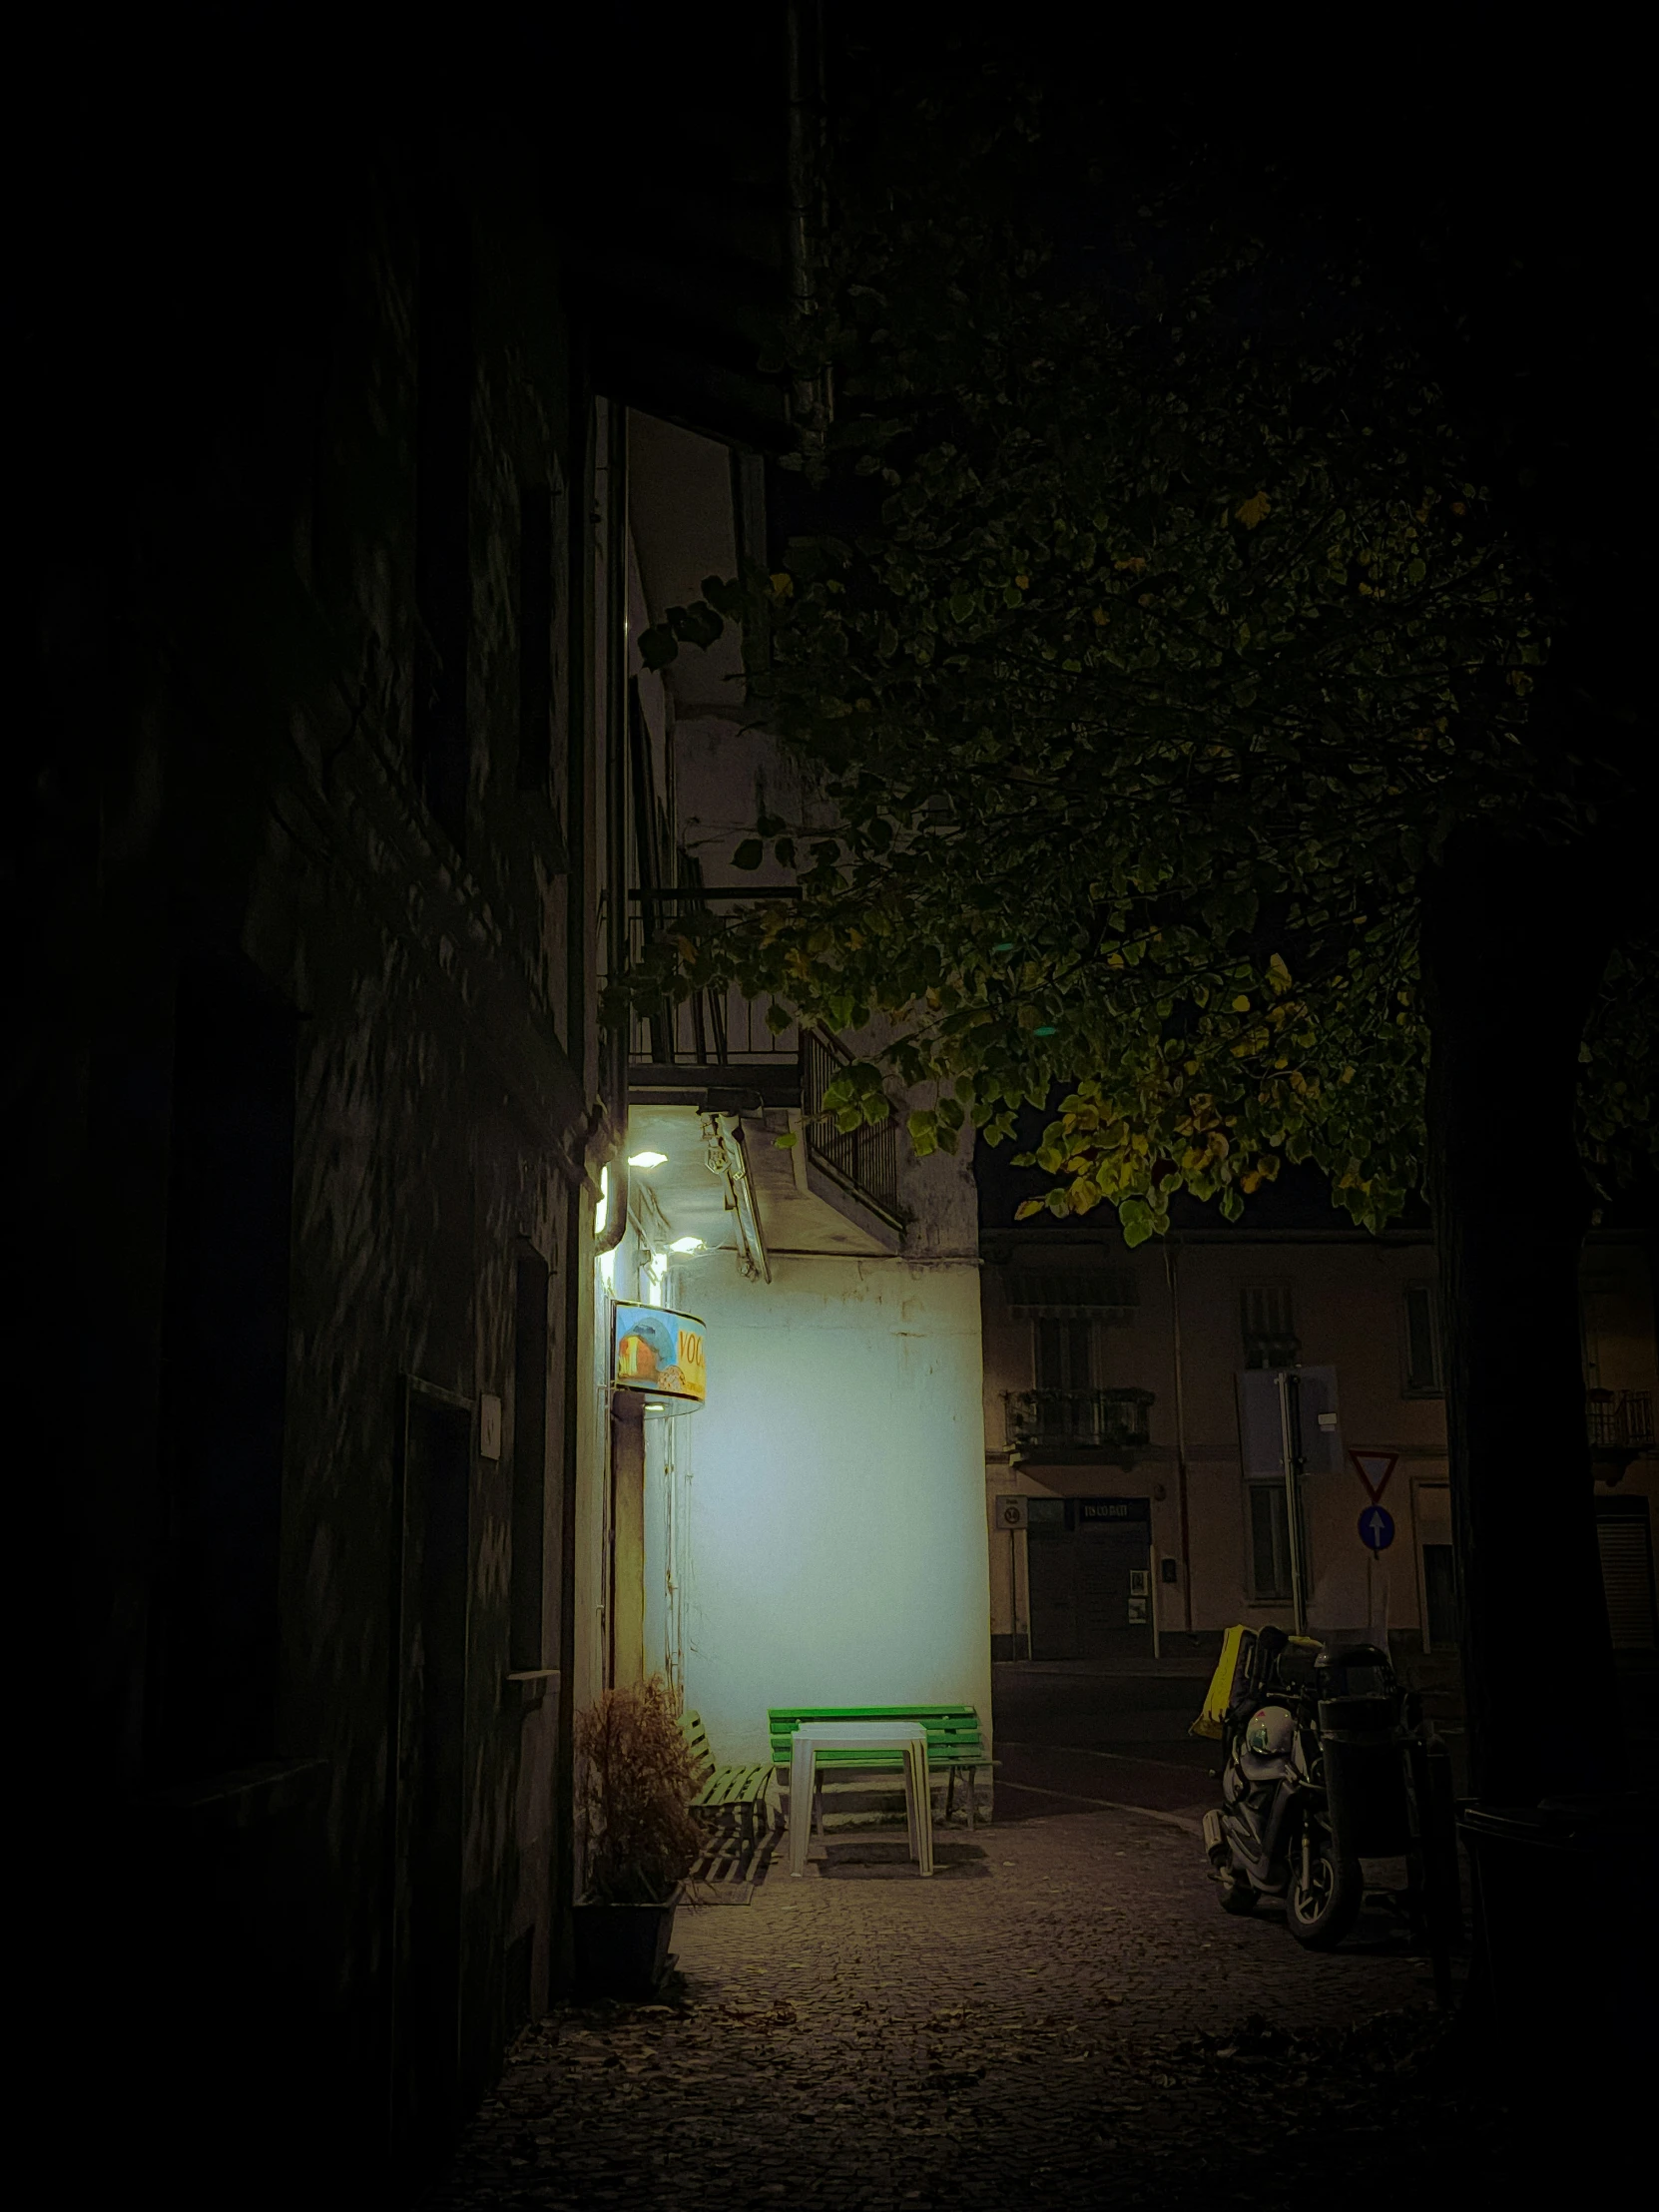 a dark street scene with a green bench and white screen